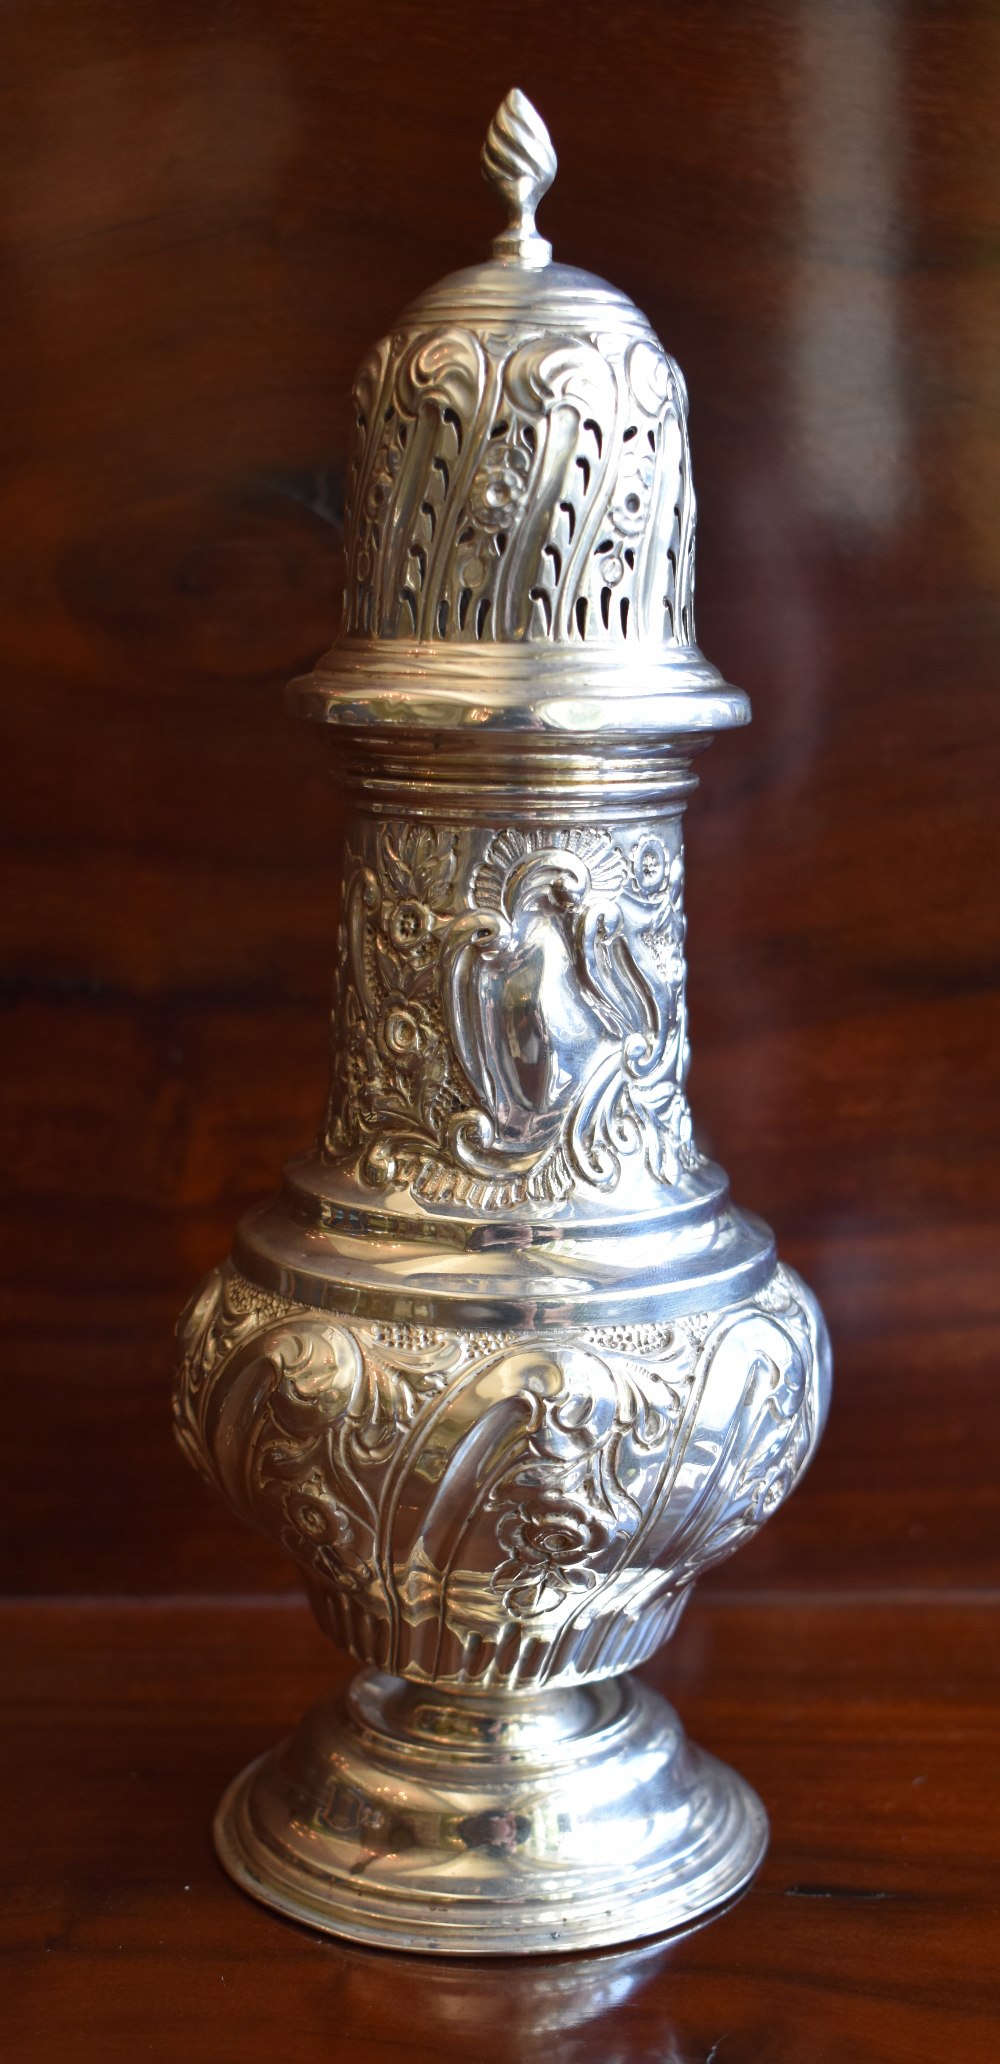 NATHAN & HAYES; an Edwardian hallmarked silver sugar caster of baluster form, with embossed